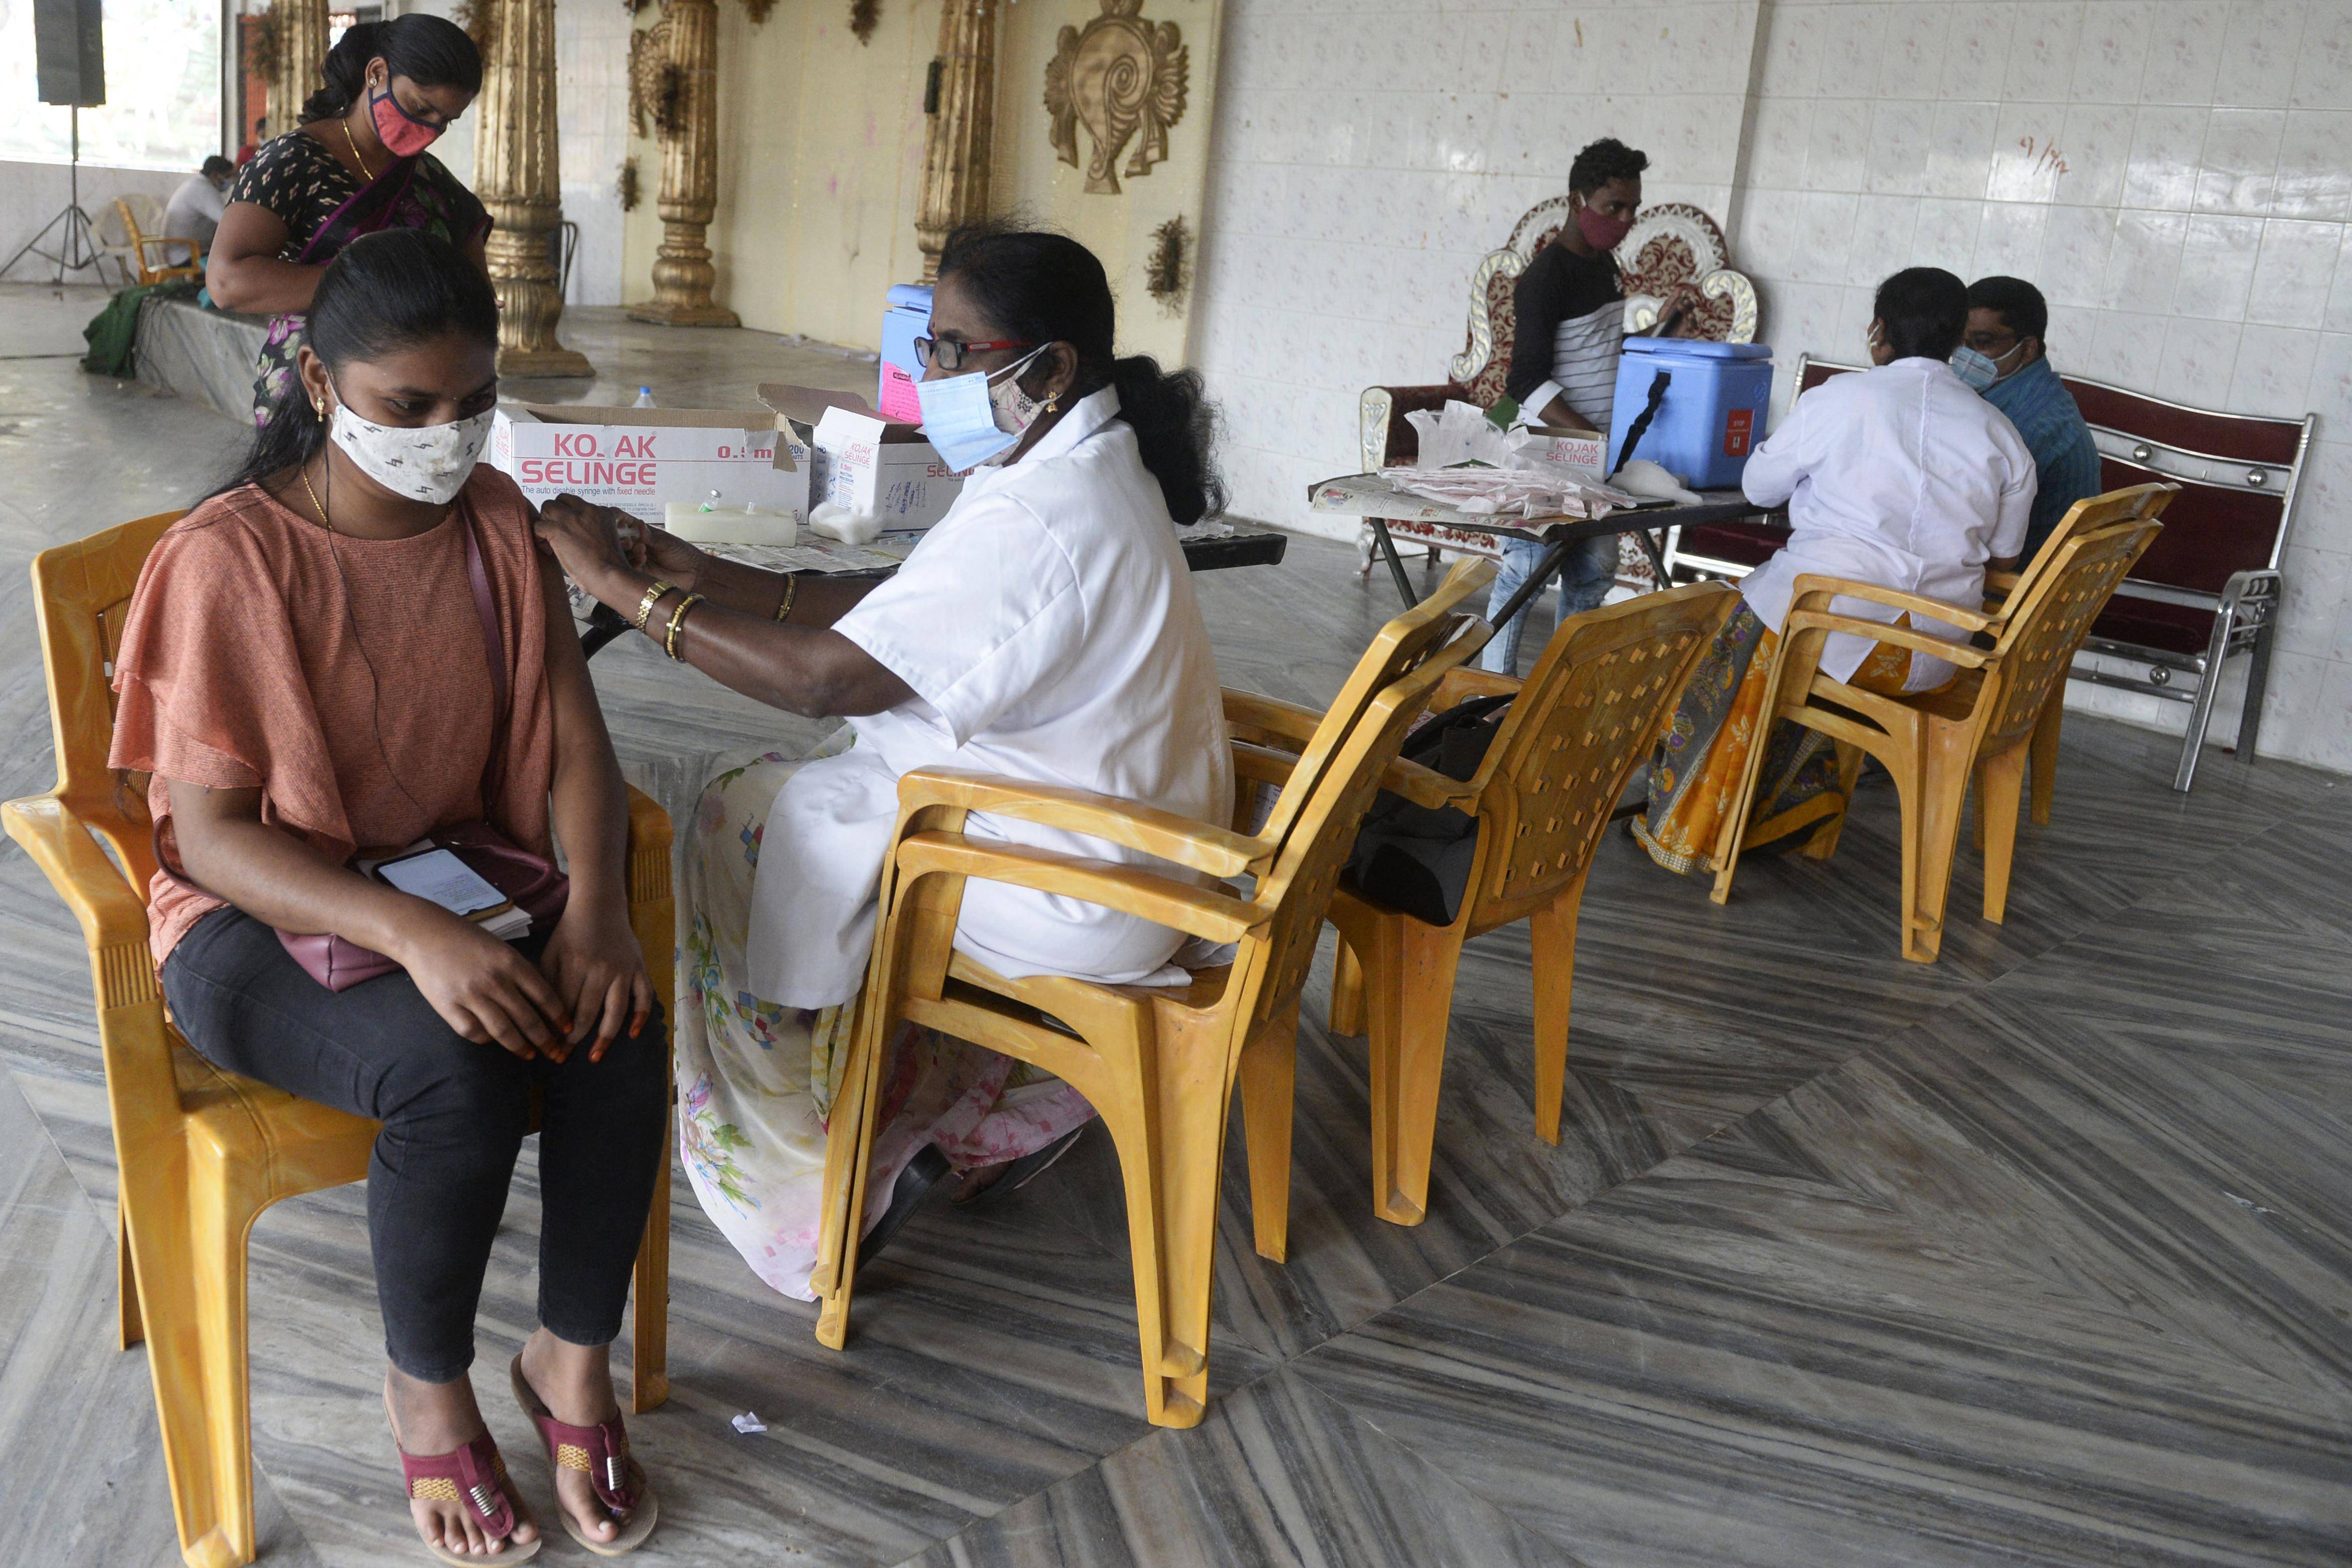 Amidst shortage warning, India has ordered 660 million Covid vaccines-News